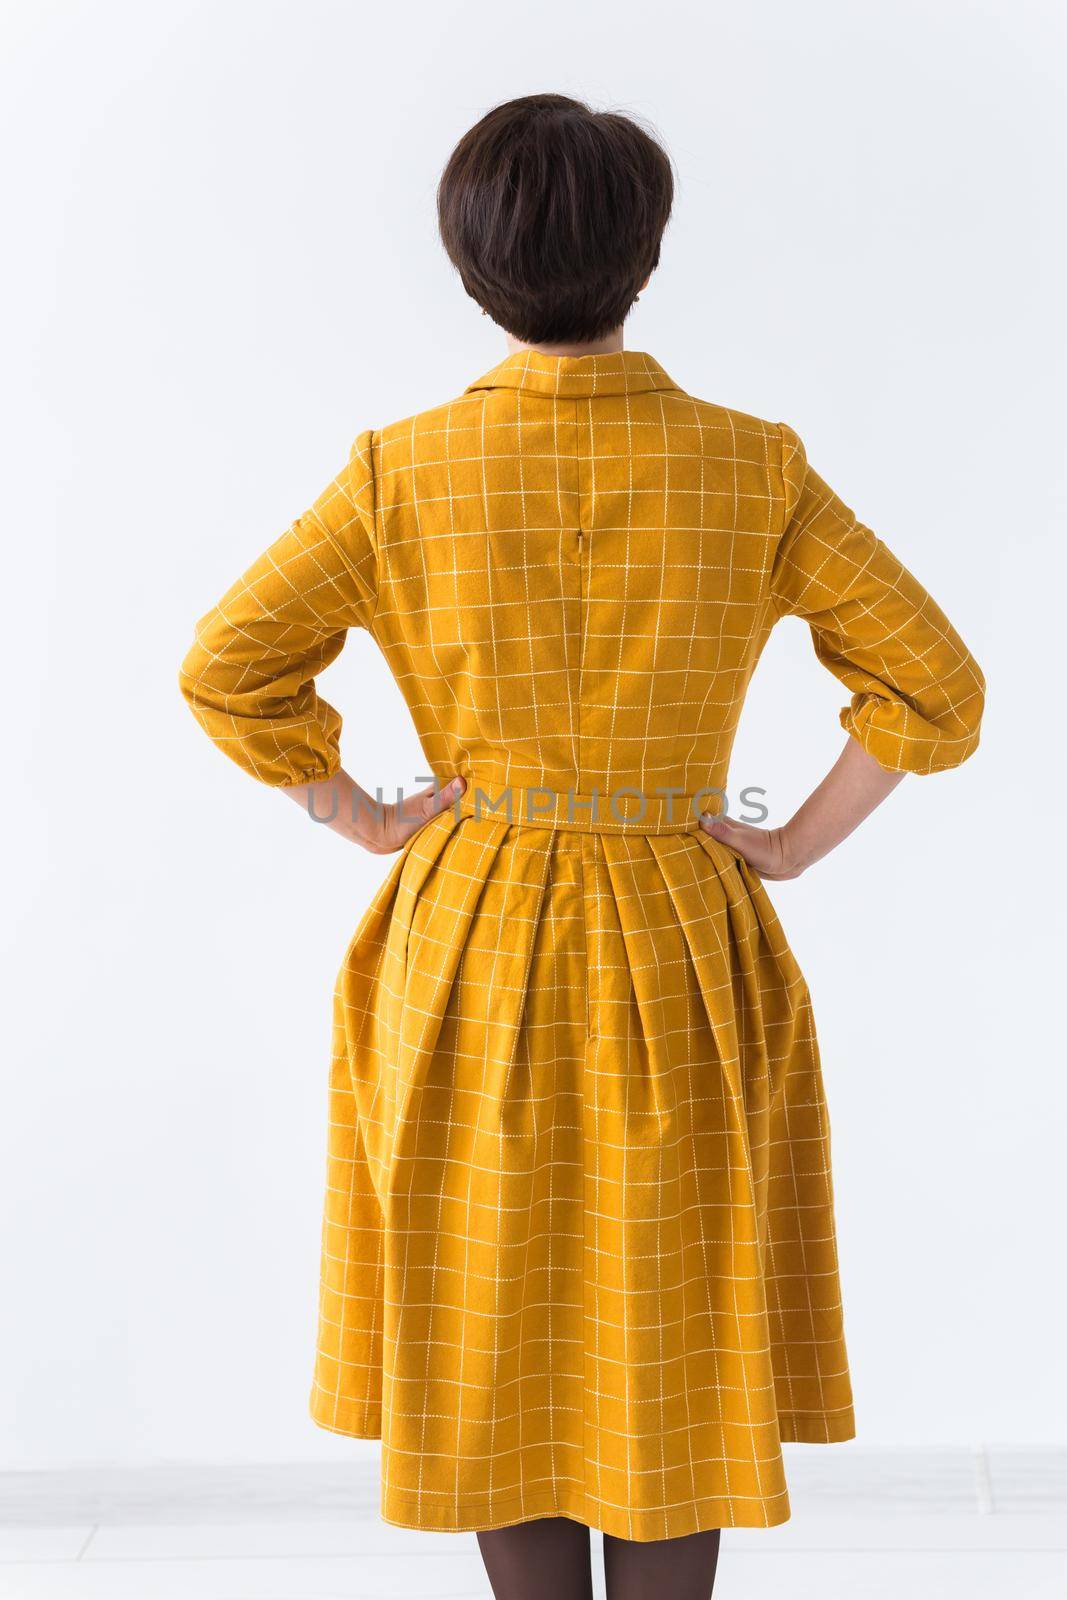 clothing, designer, people concept - back view of attractive woman in a yellow dress posing on white room. by Satura86